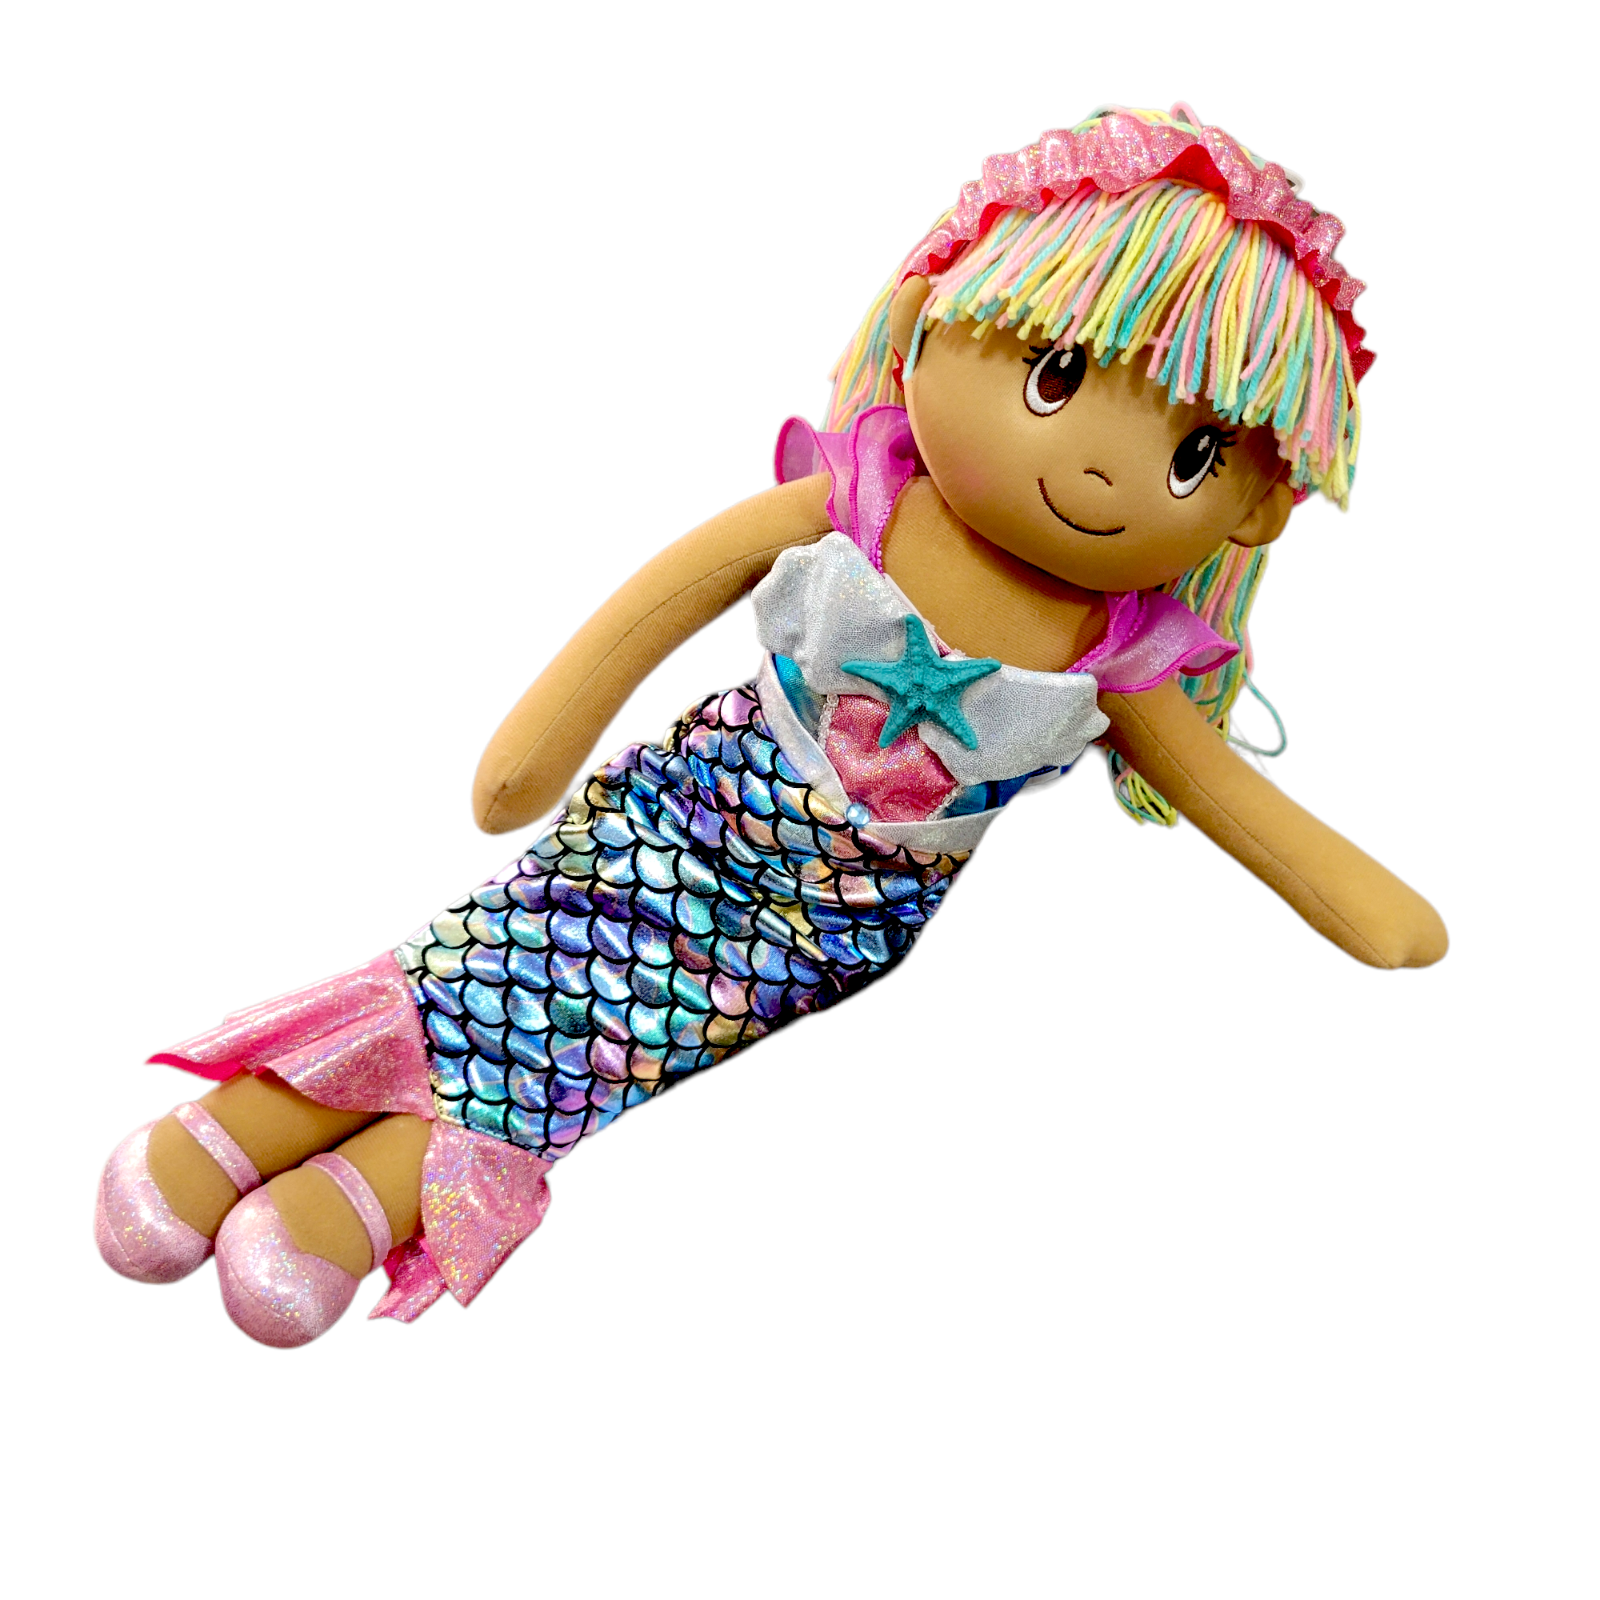 Mermaid Doll, Mermaid Gifts for Girls, Plush Rag Doll in a Variety of  Nautical Prints, 18 inch (Lobster, Blonde) 